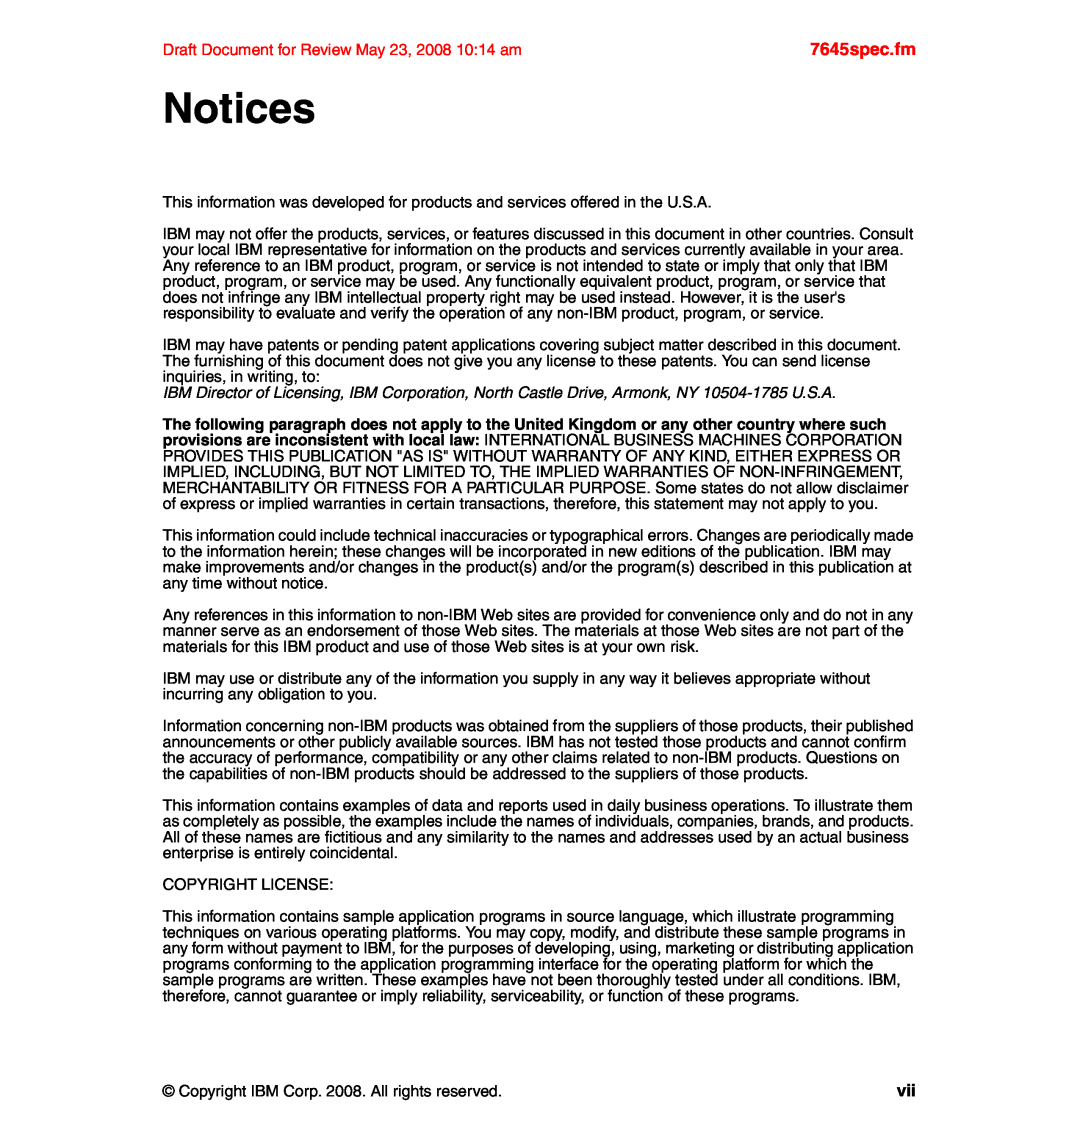 IBM SG24-7645-00 manual Notices, 7645spec.fm, Draft Document for Review May 23, 2008 10:14 am 